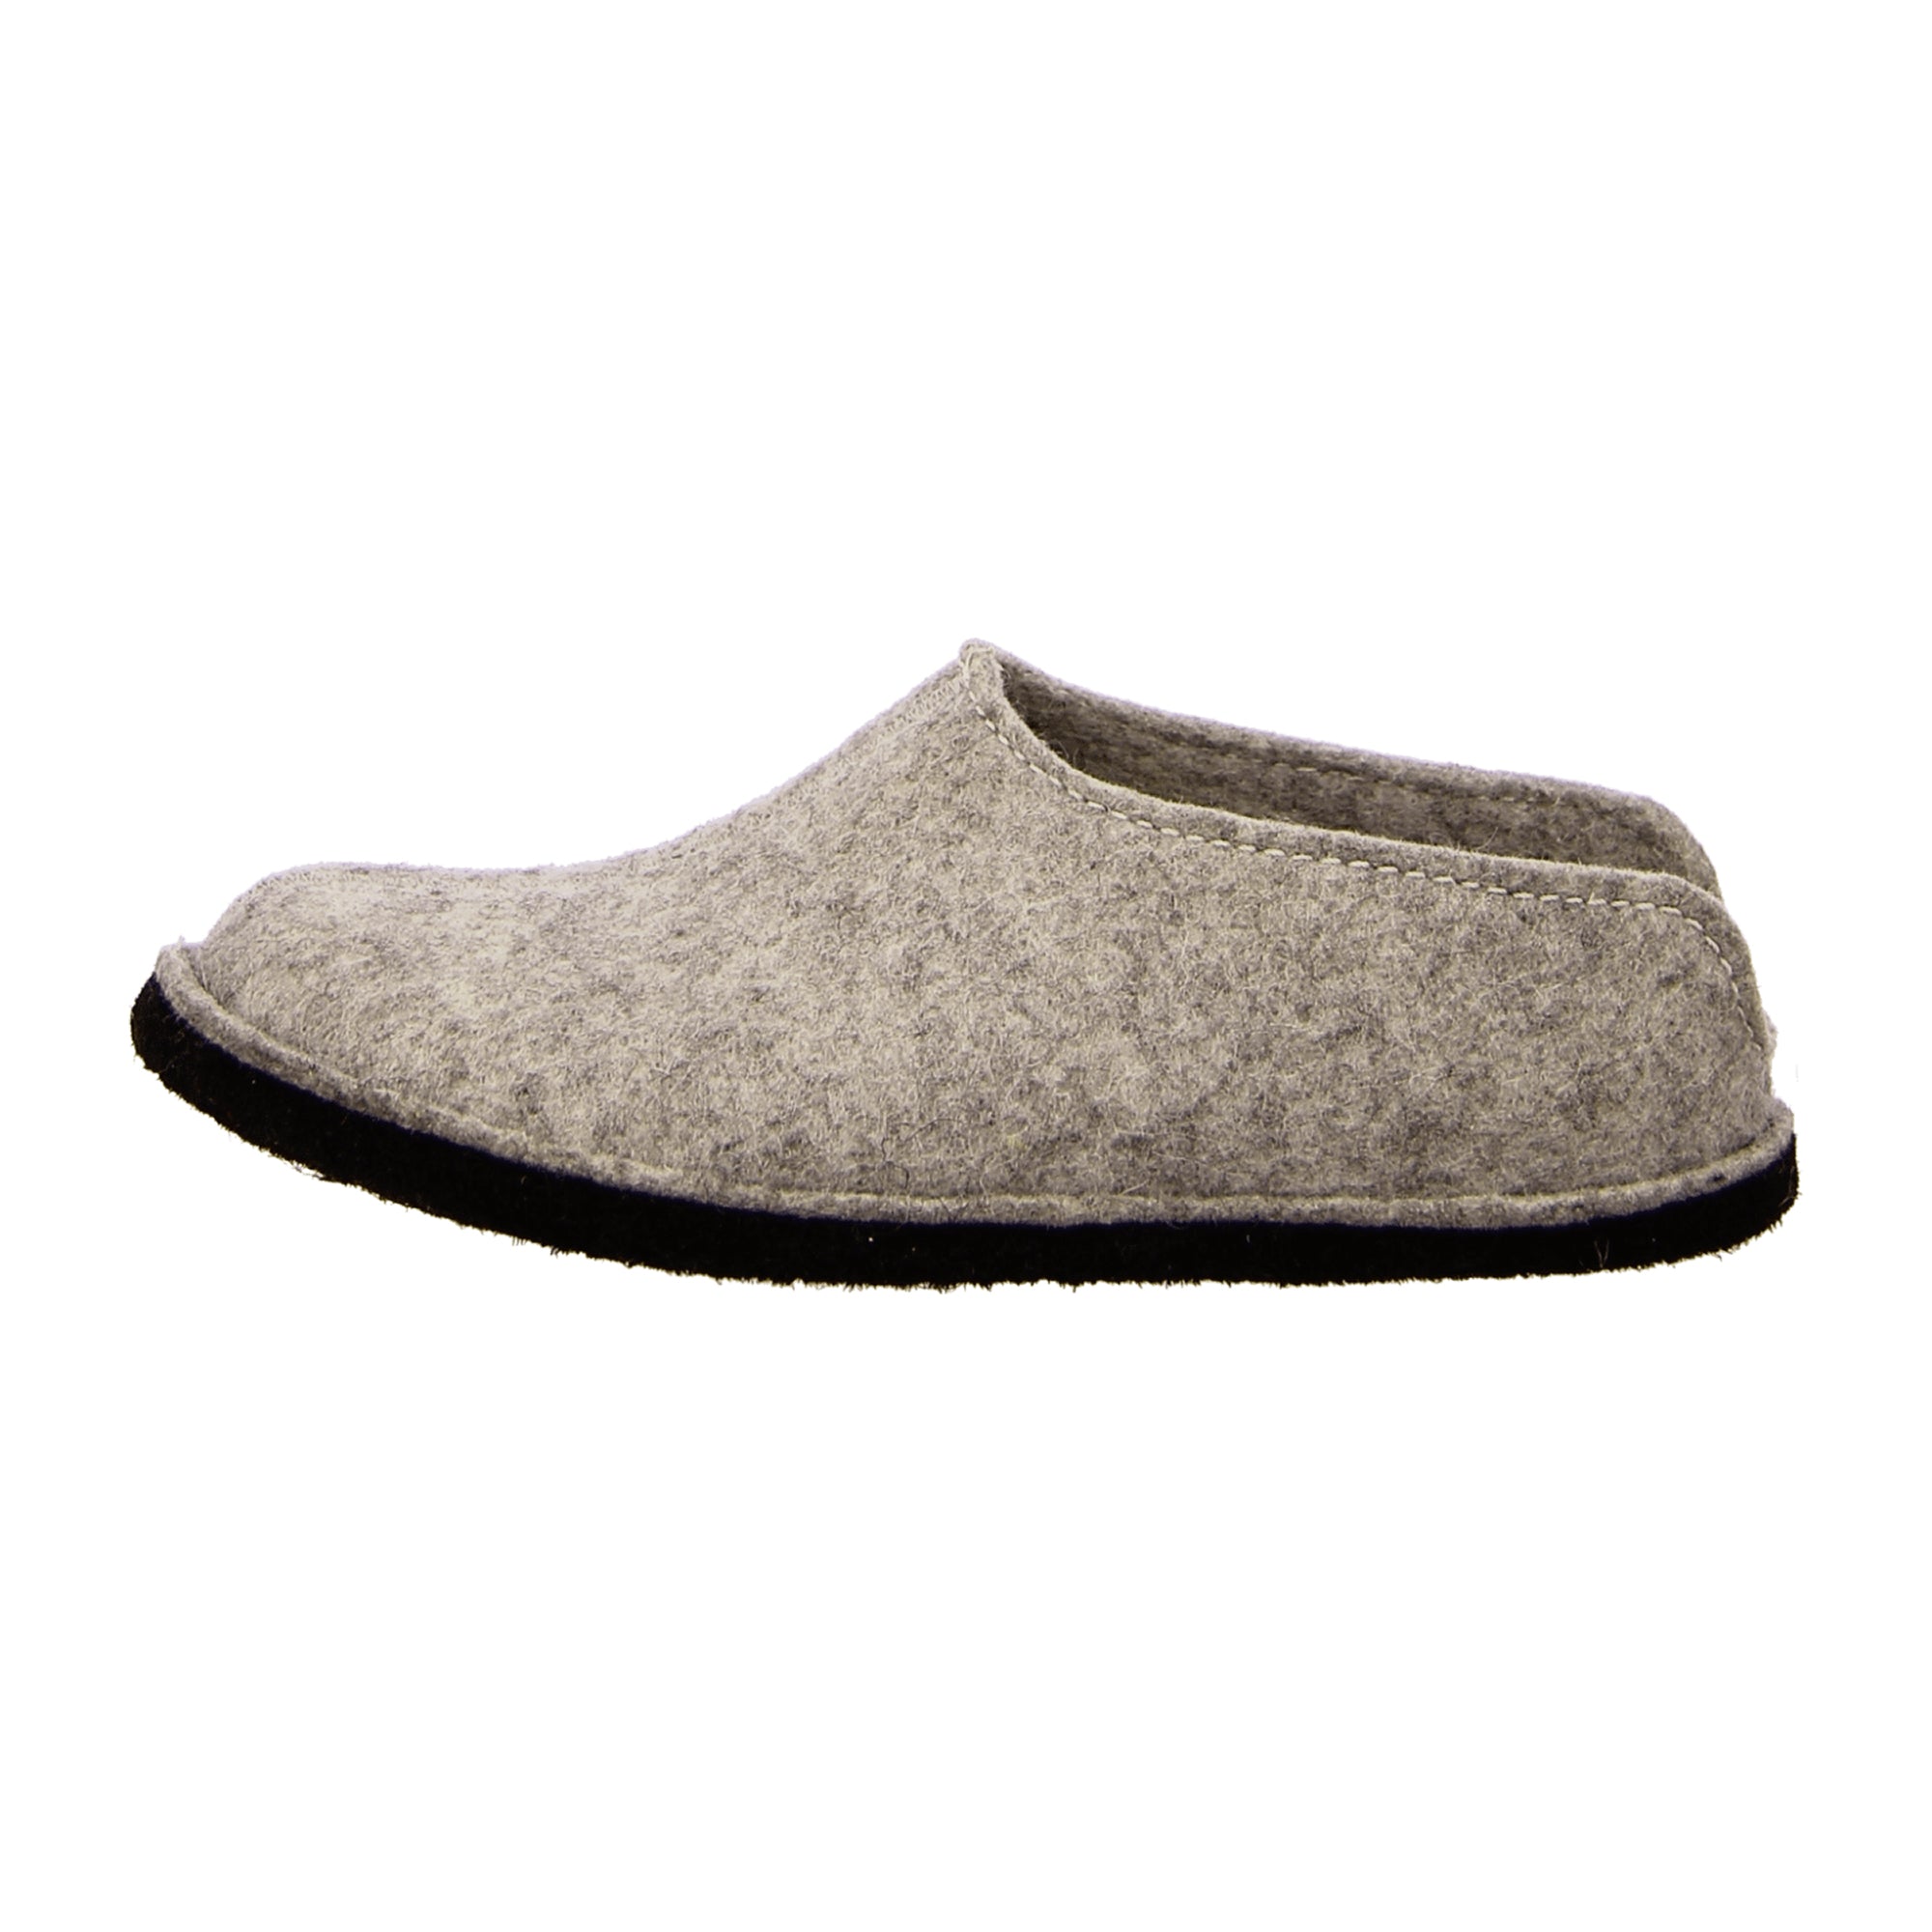 Haflinger Flair Smily Women's Slippers, Stylish Gray Wool - Durable & Comfortable